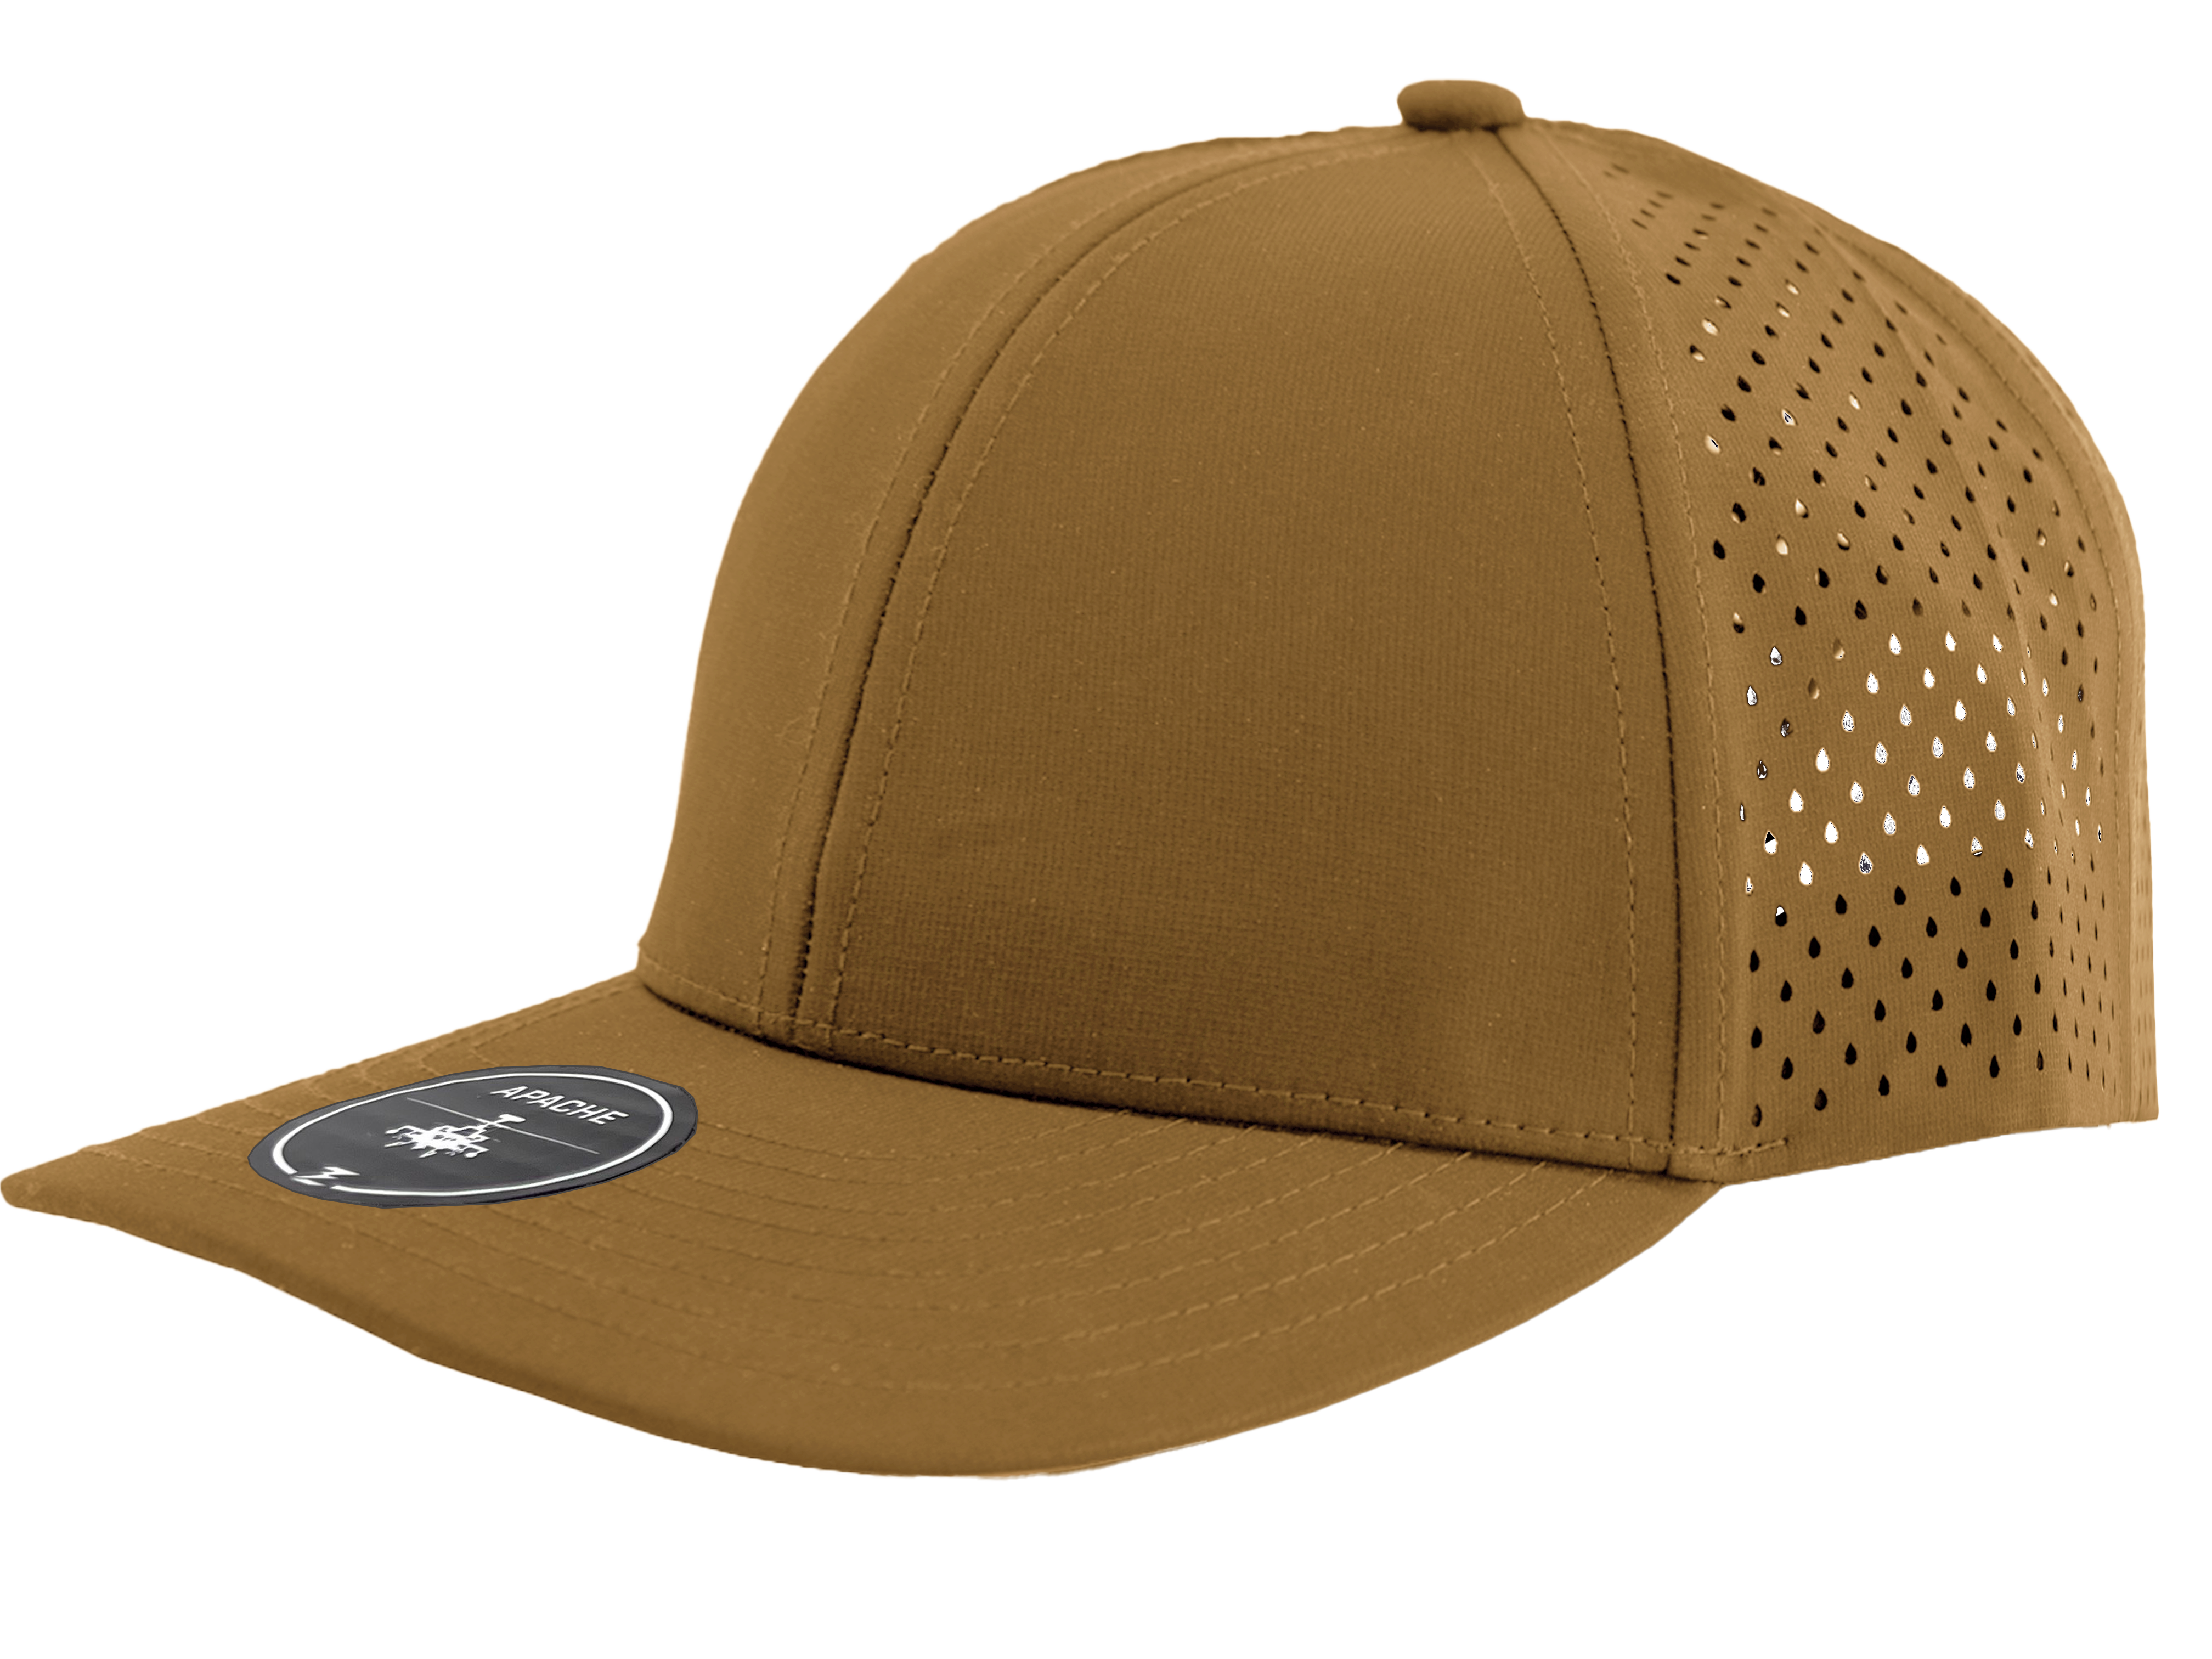 caramel apache Custom Hat perforated side view hat